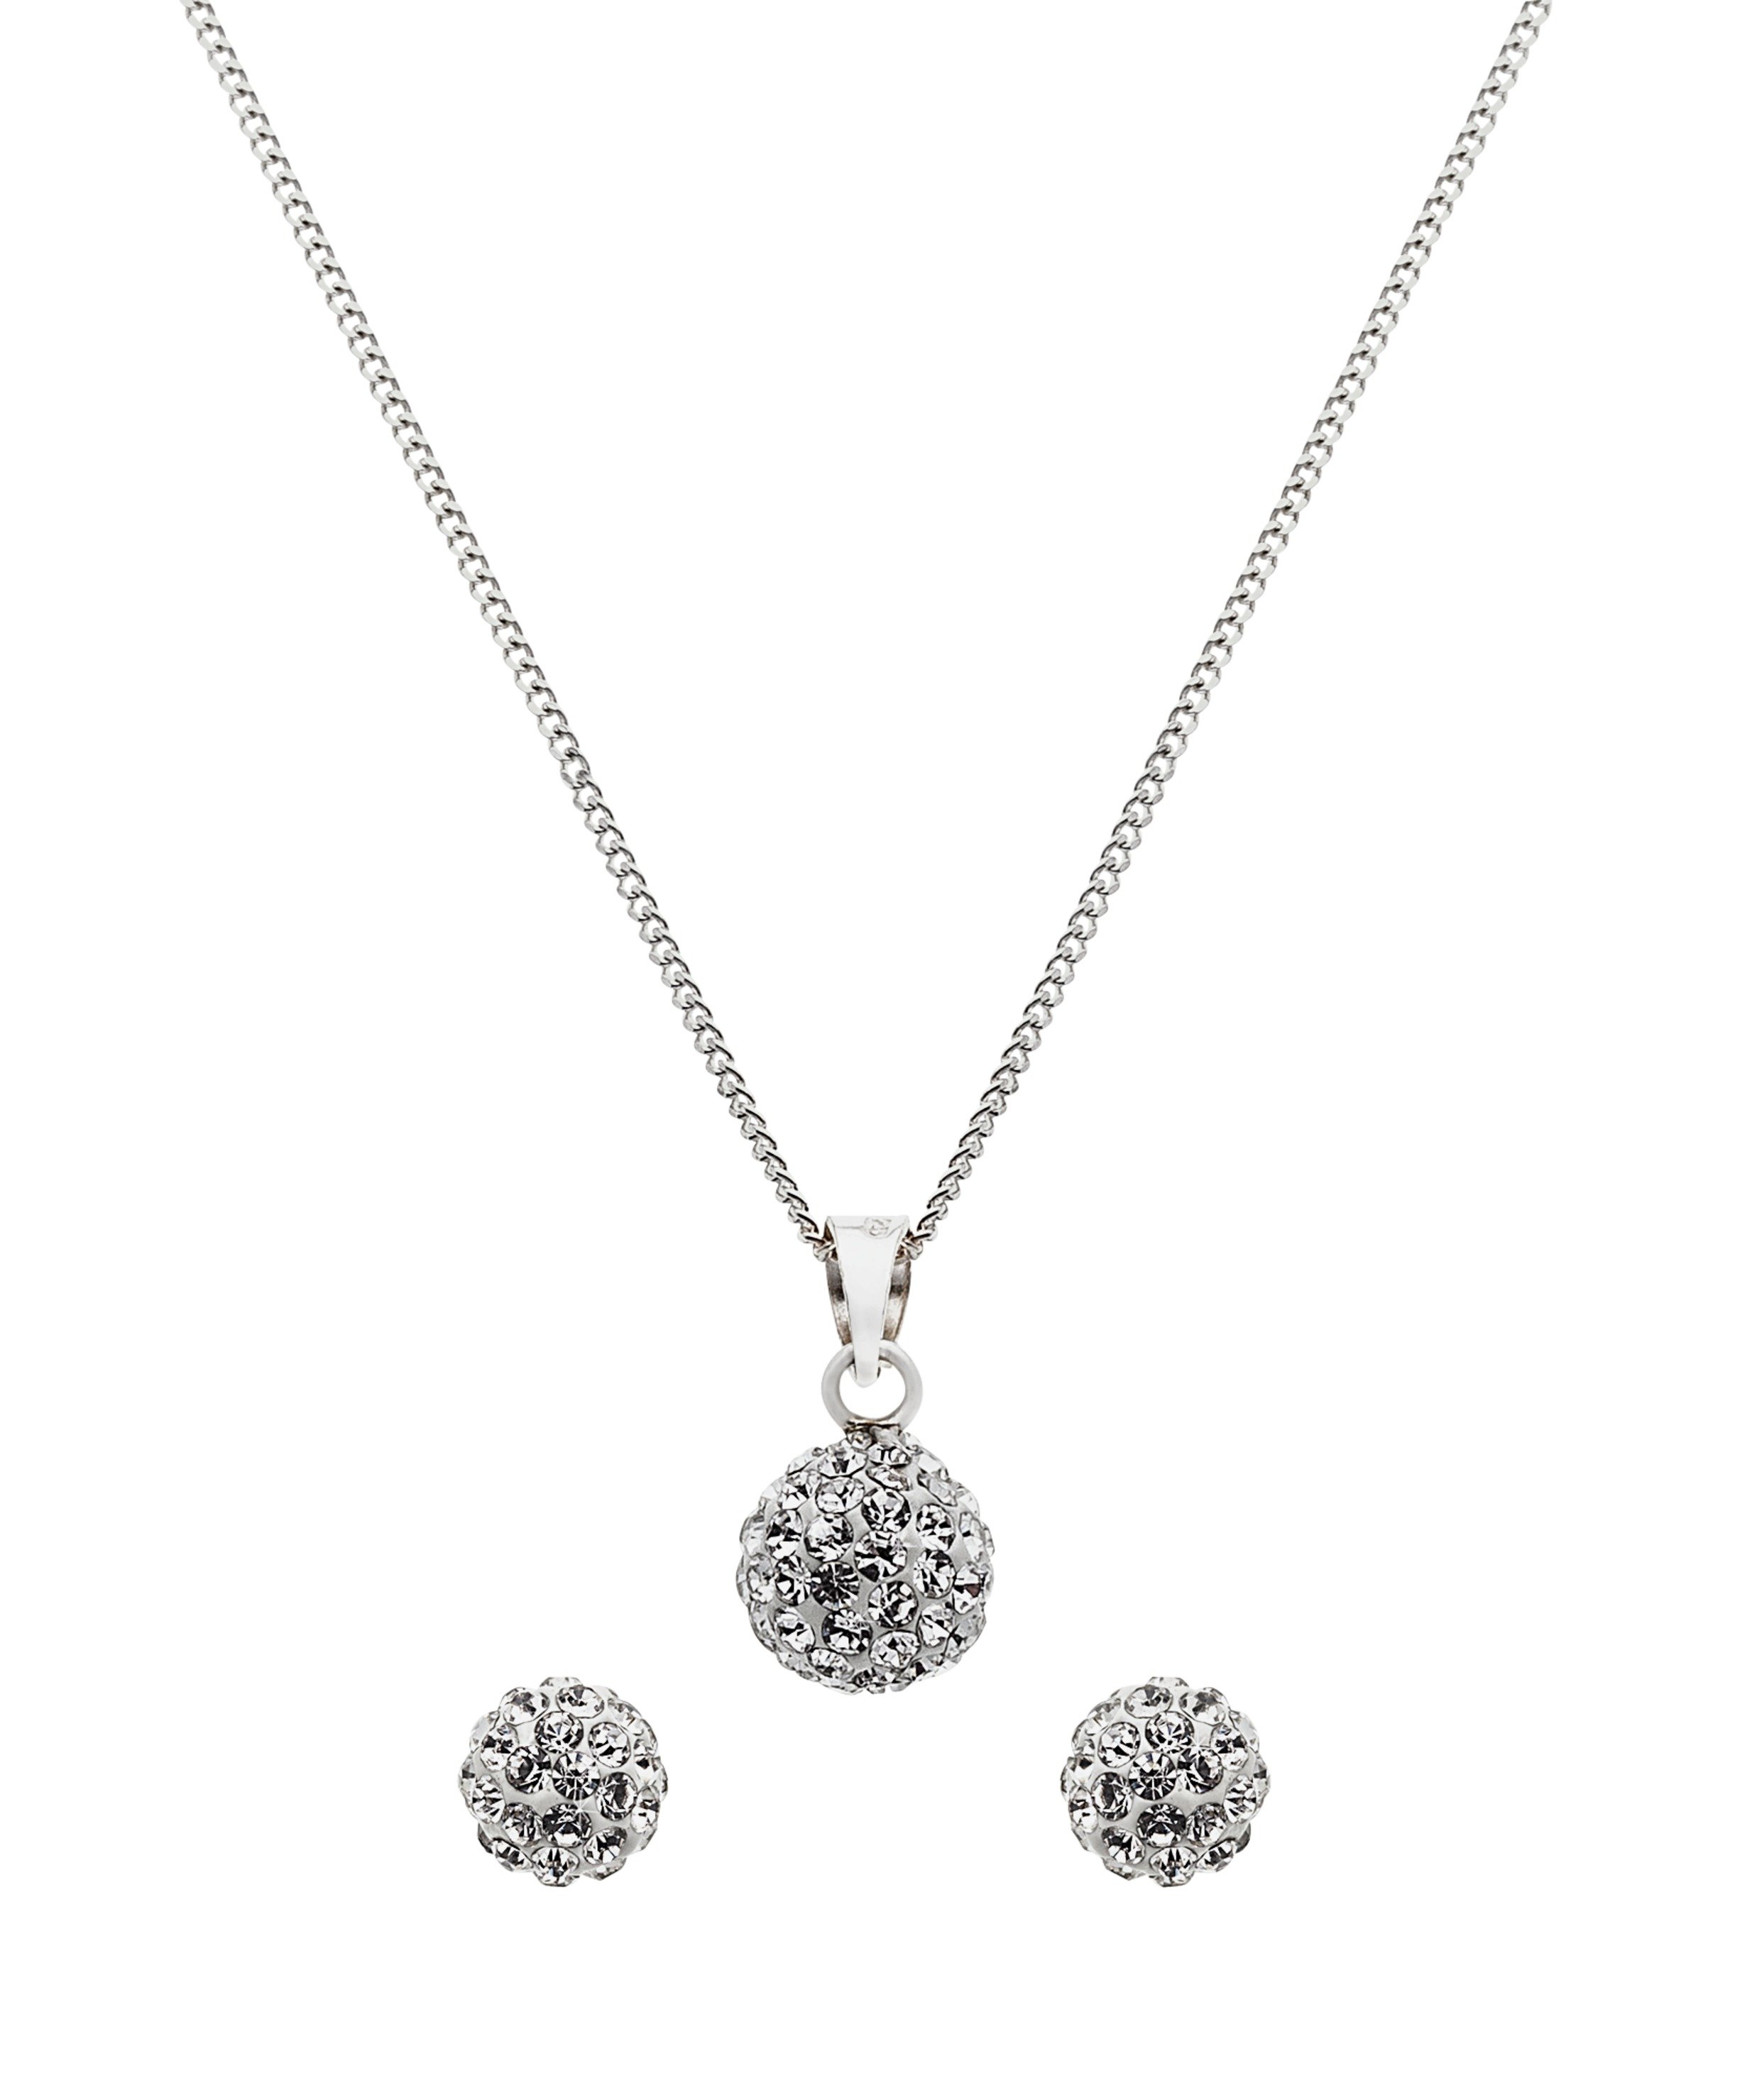 Buy Ladies' necklaces at Argos.co.uk - Your Online Shop for Jewellery ...